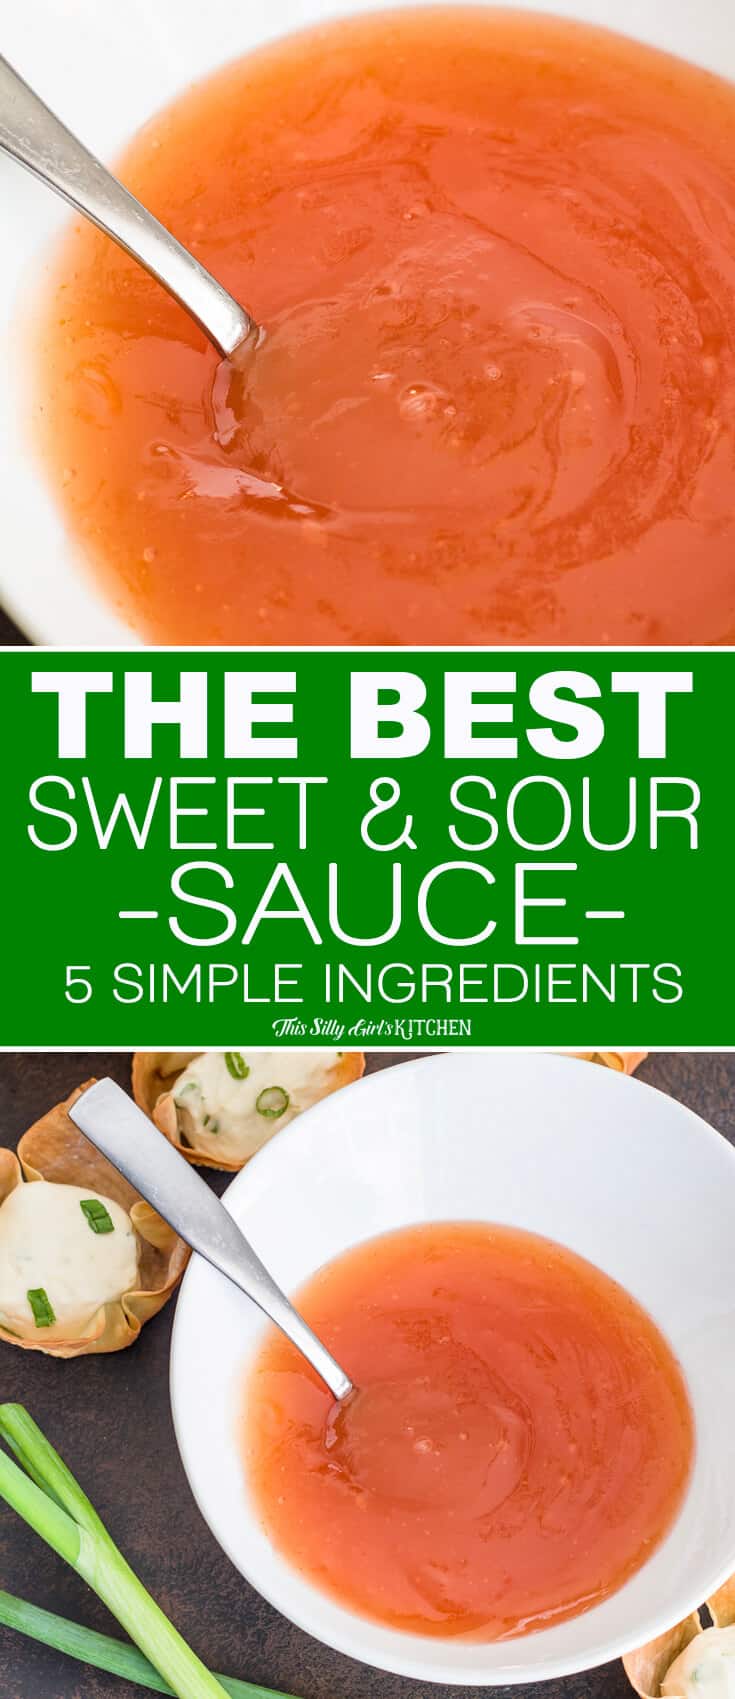 The Best Sweet and Sour Sauce, only 5 ingredients and ready in minutes! #Recipe from ThisSillyGirlsKitchen.com #ChineseTakeout #sweetandsoursauce #BetterThanTakeout